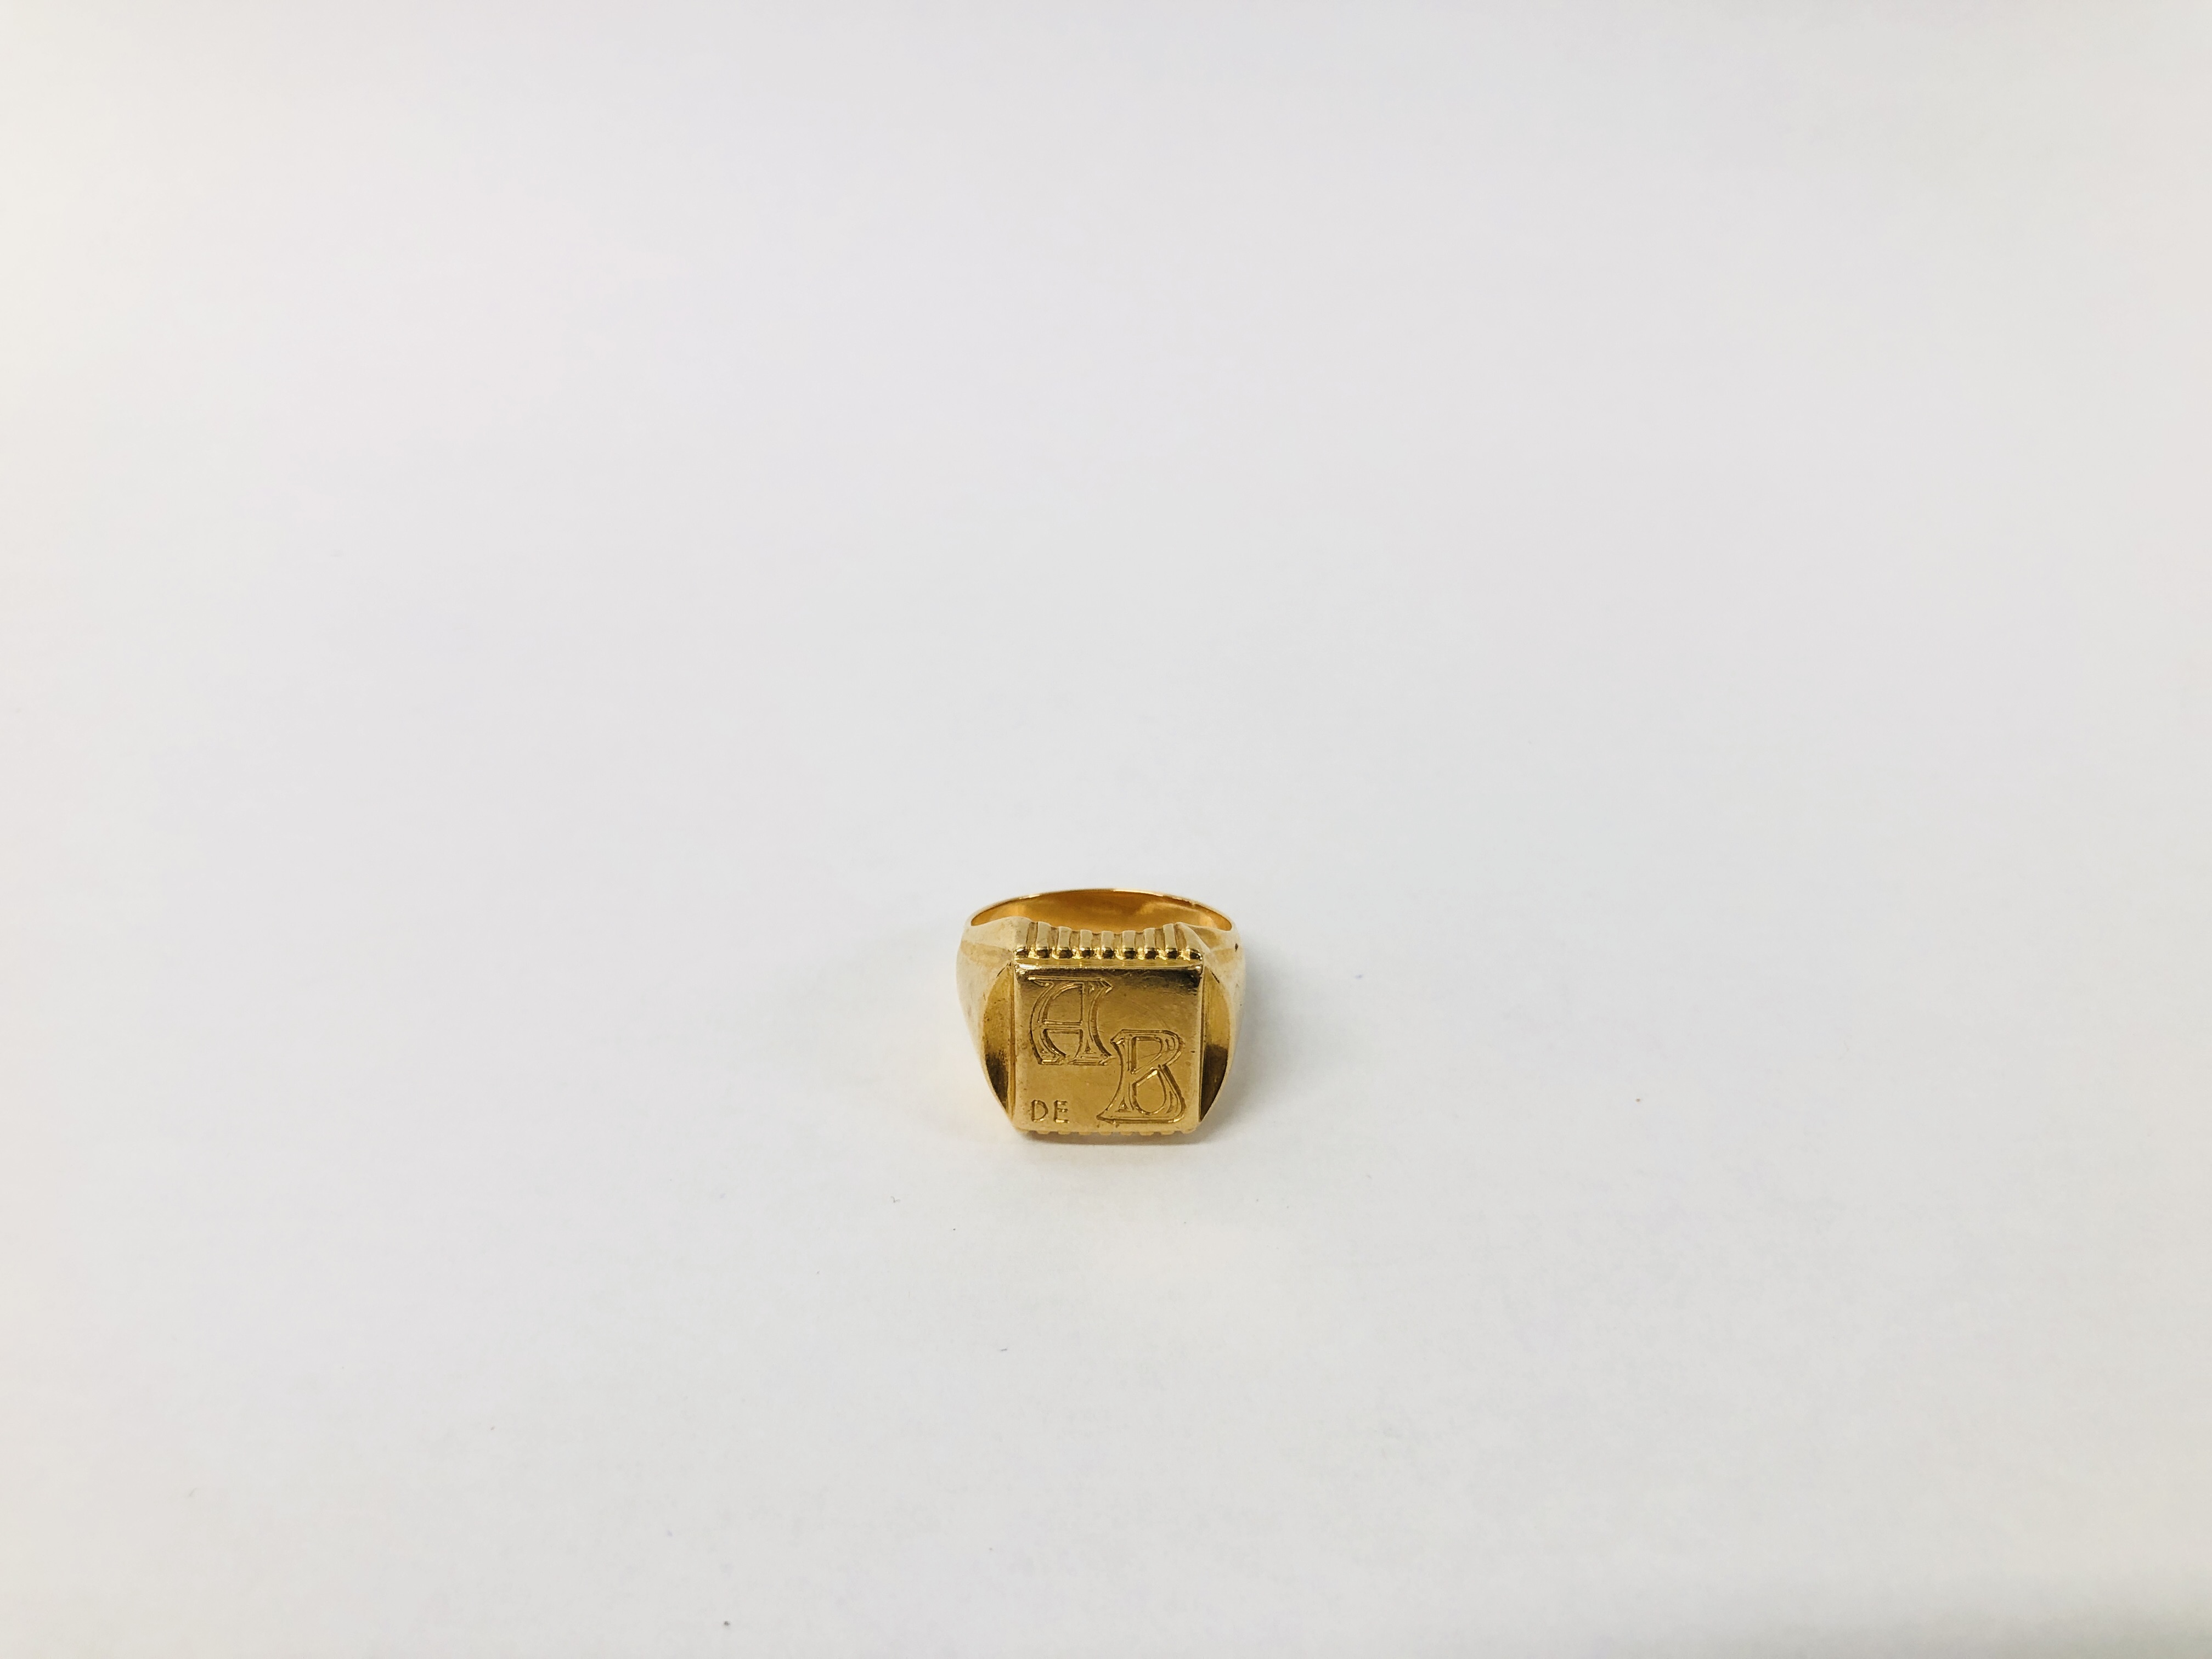 A GENTLEMAN'S SIGNET RING CONTINENTAL MARKS.